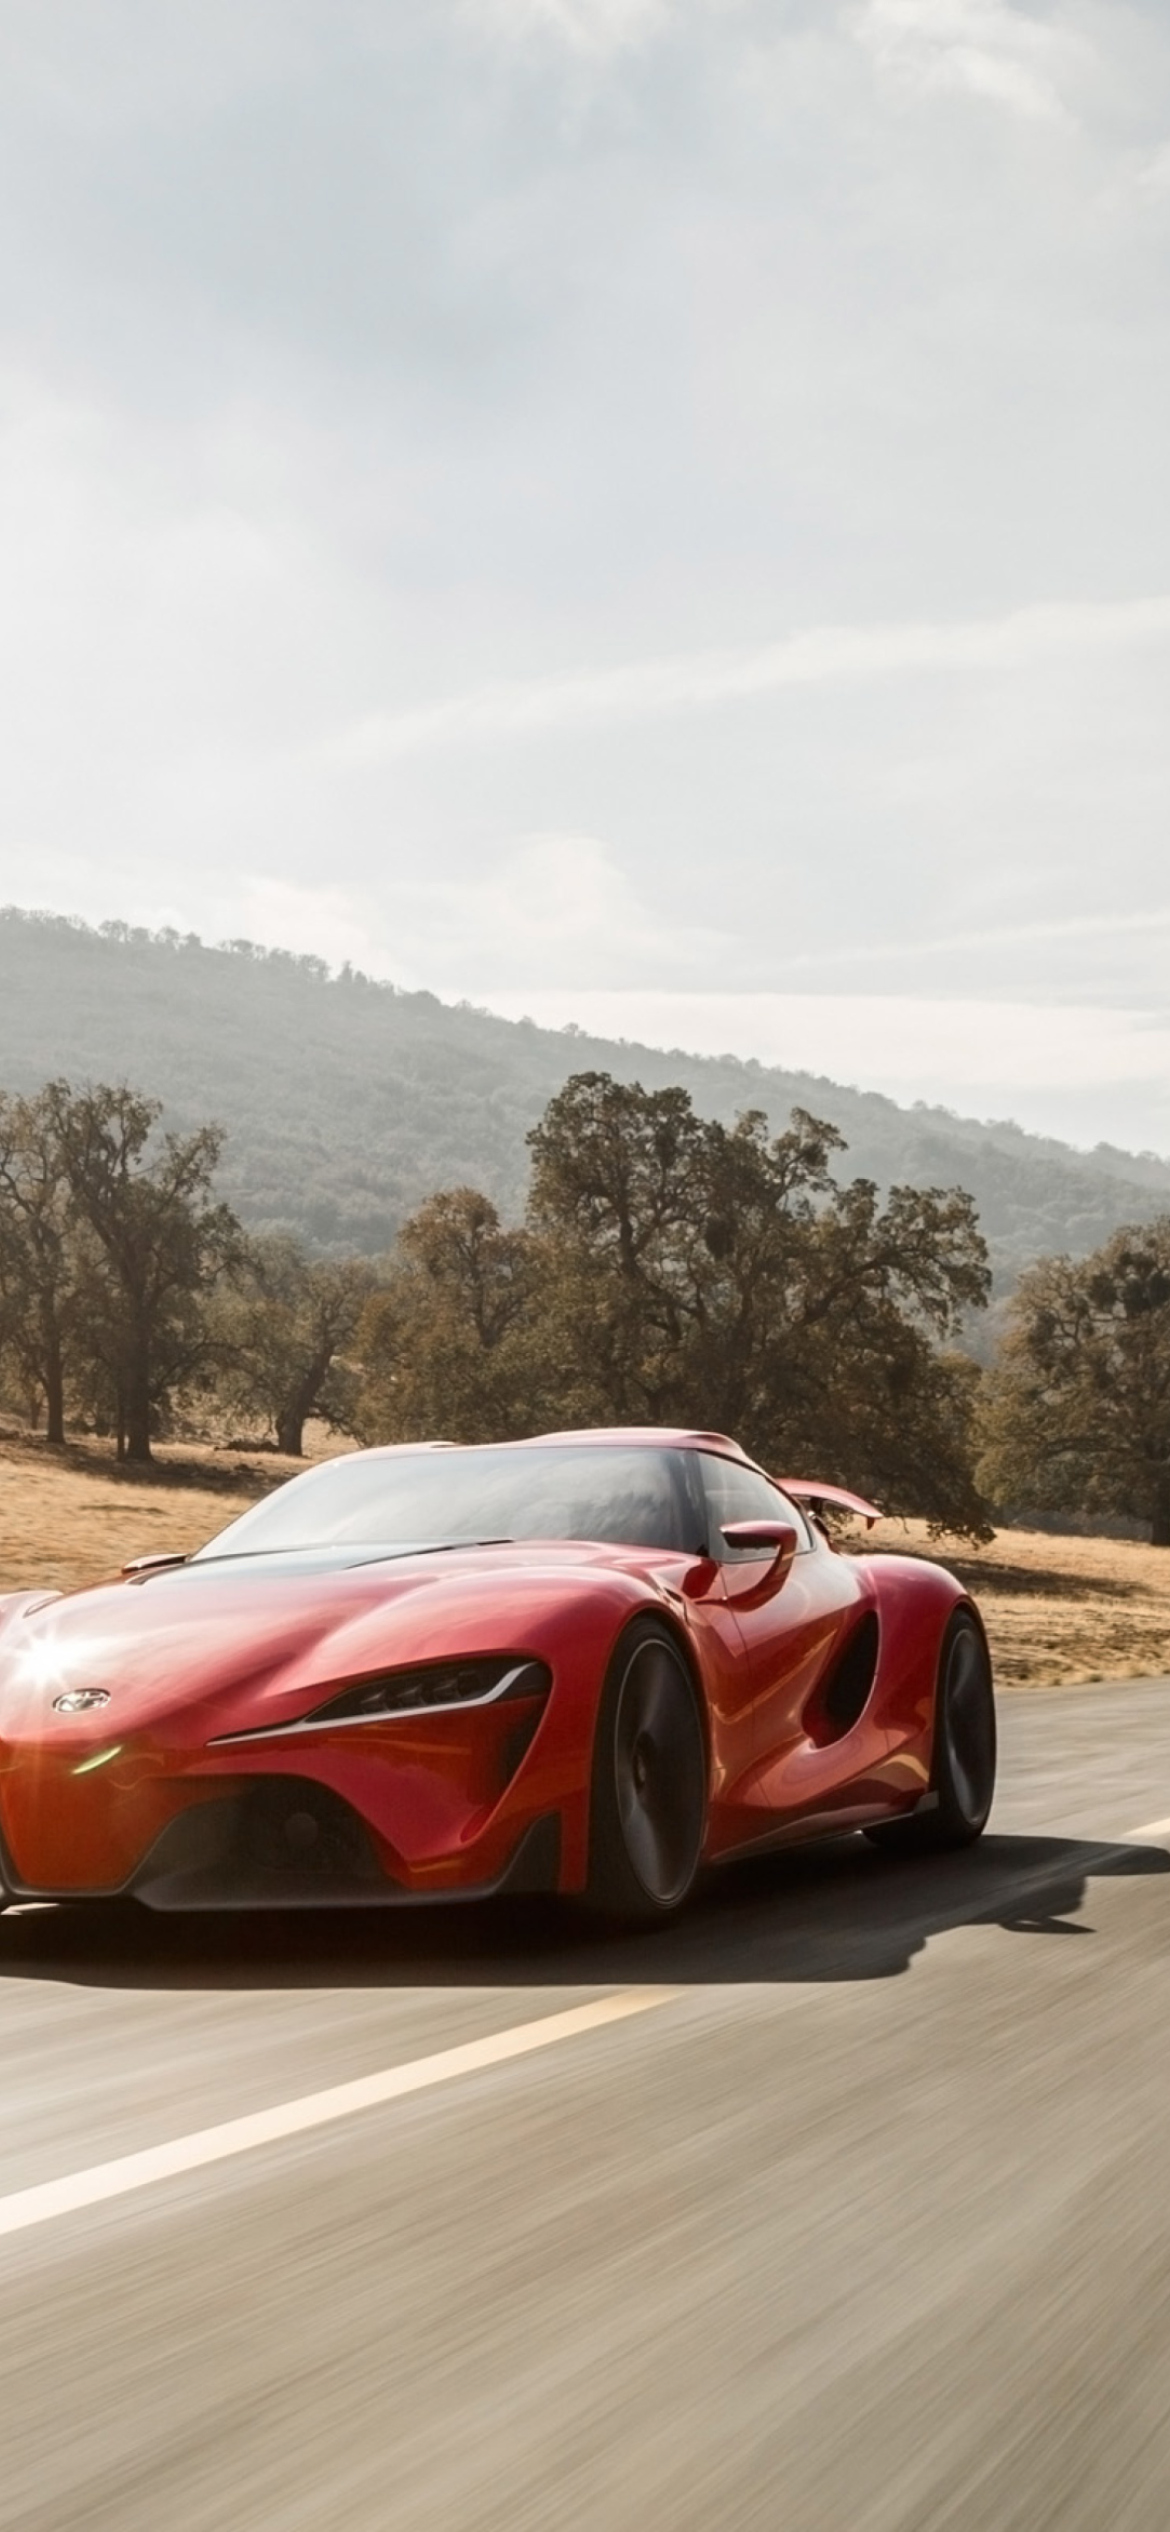 2014 Toyota Ft 1 Concept Front Angle wallpaper 1170x2532